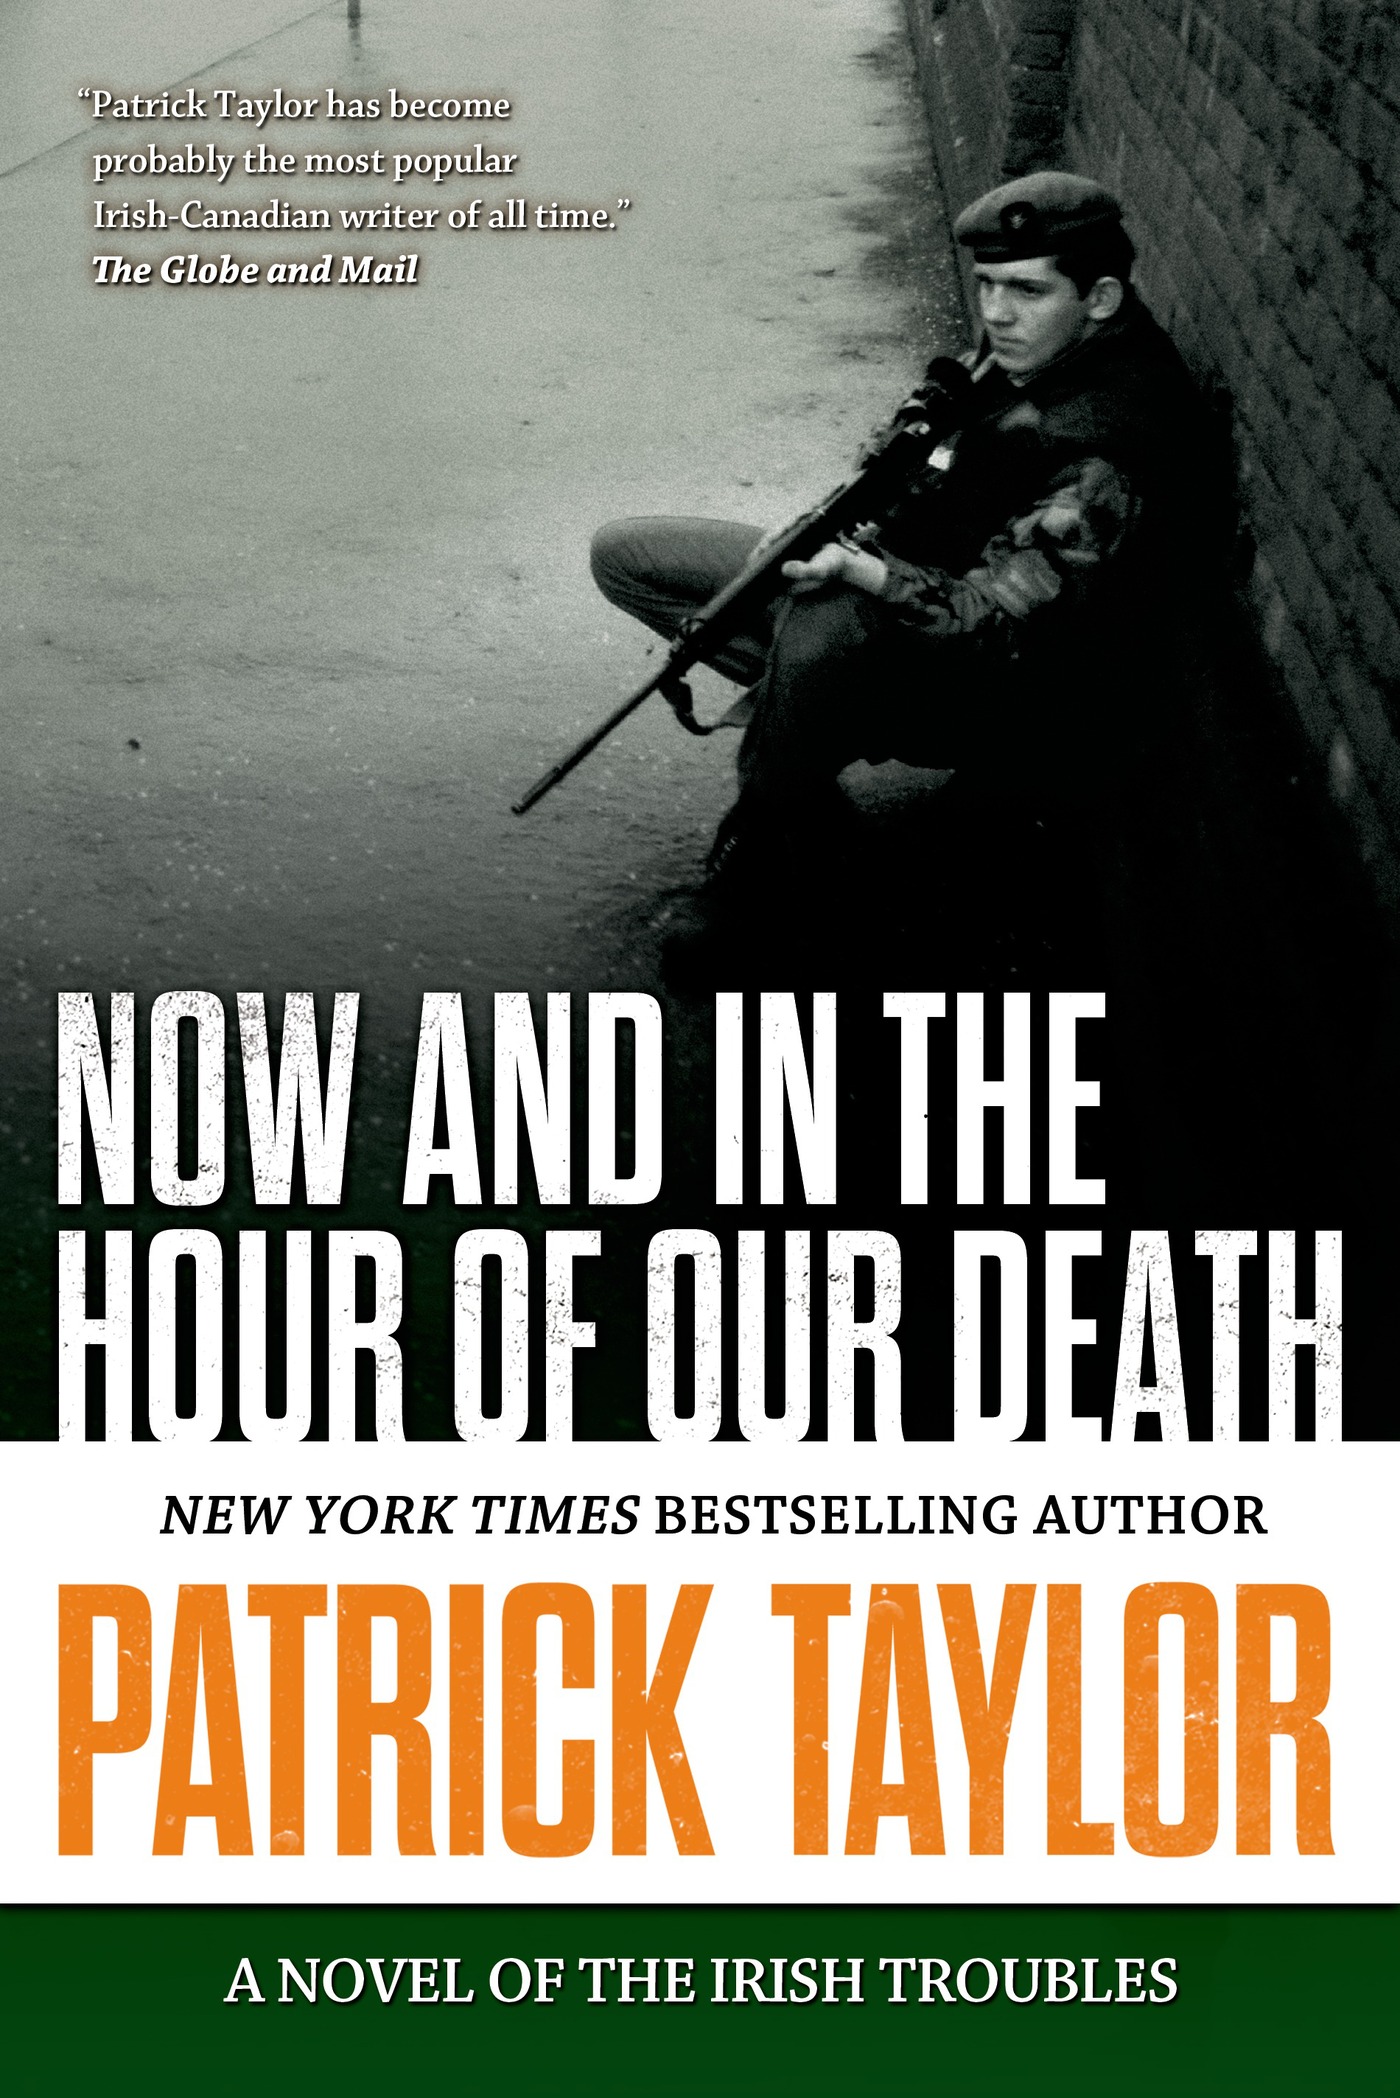 Now and in the Hour of Our Death : A Novel of the Irish Troubles by Patrick Taylor